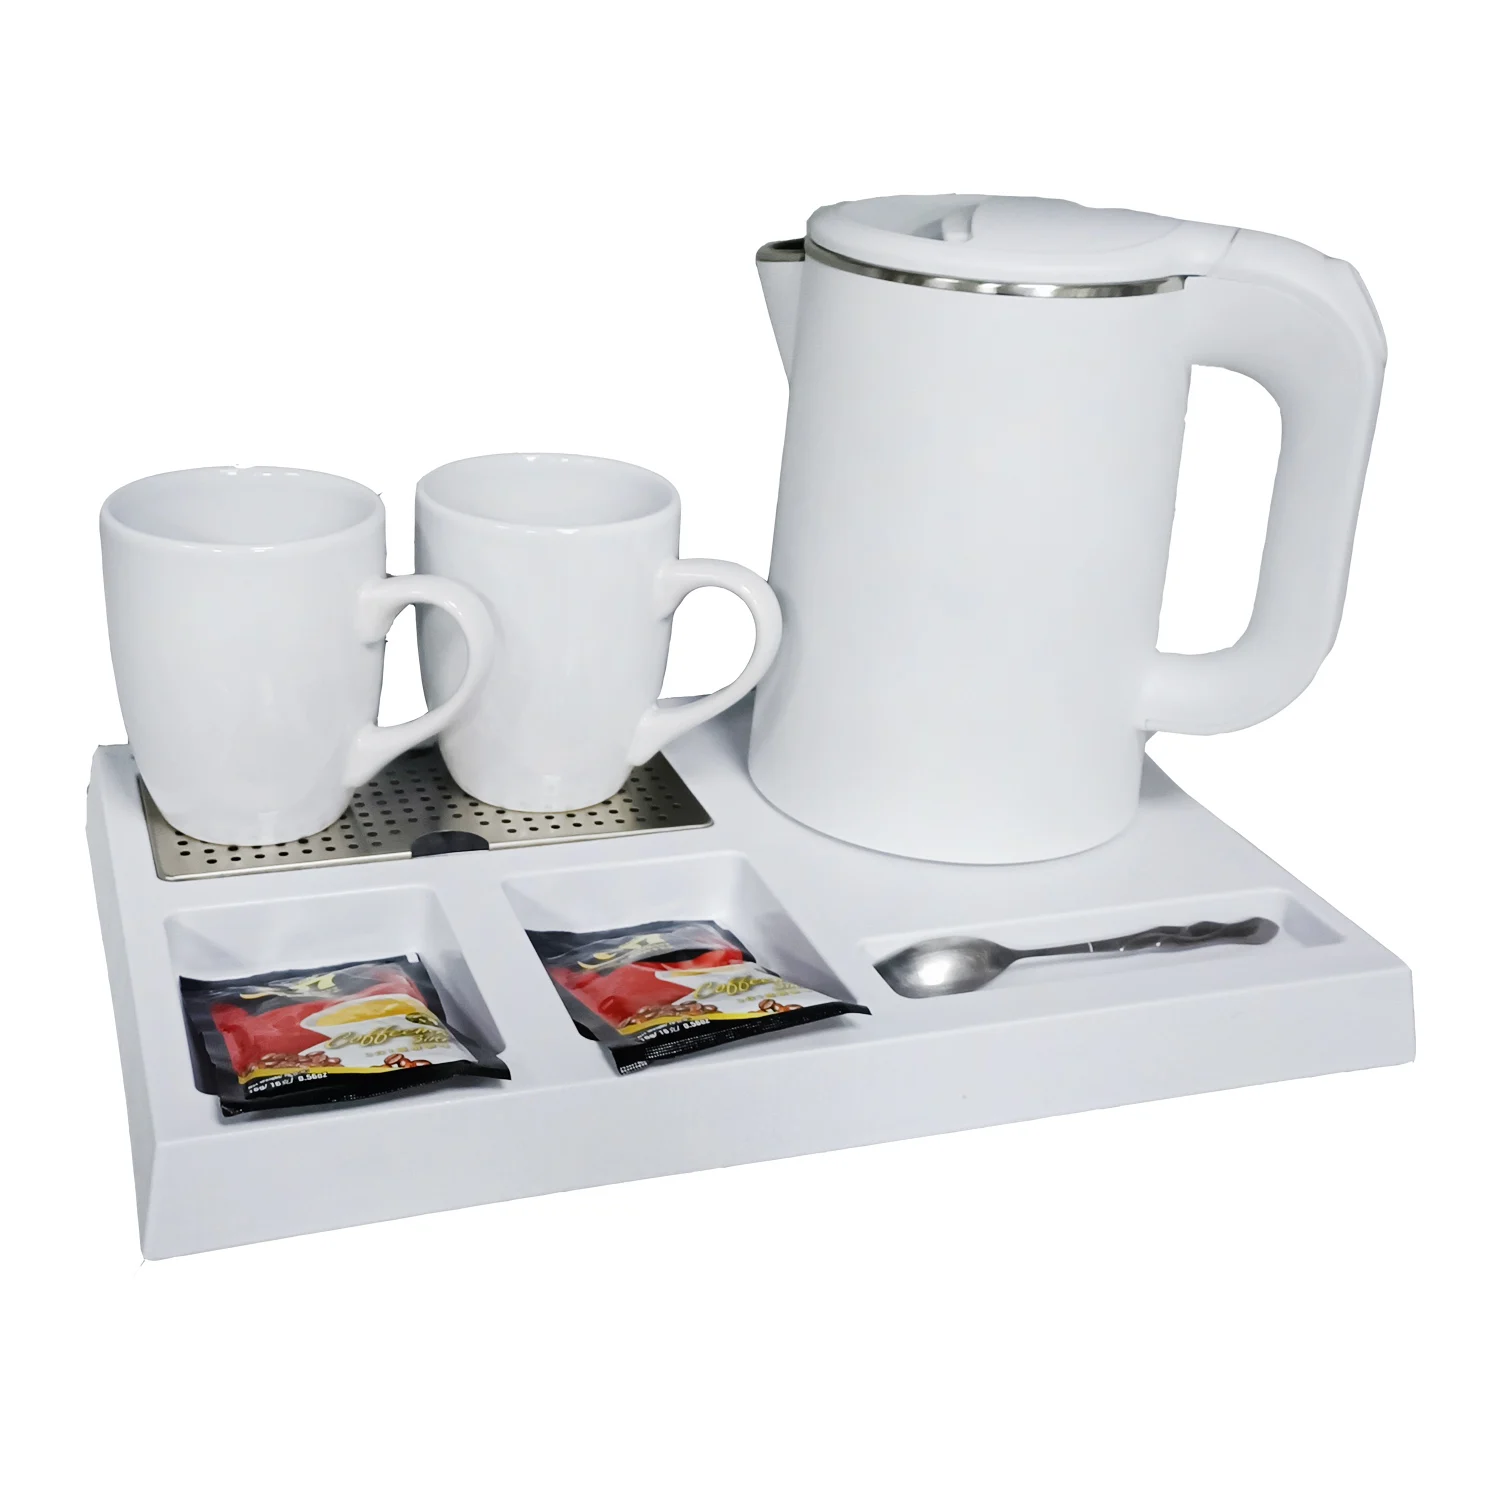 Converge experience Bible Water Boiler 0.8l Hotel Welcome Tray Set High Quality Double Wall Electric  Kettle - Buy Hotel Welcome Tray Set,High Quality,Electric Kettle Product on  Alibaba.com